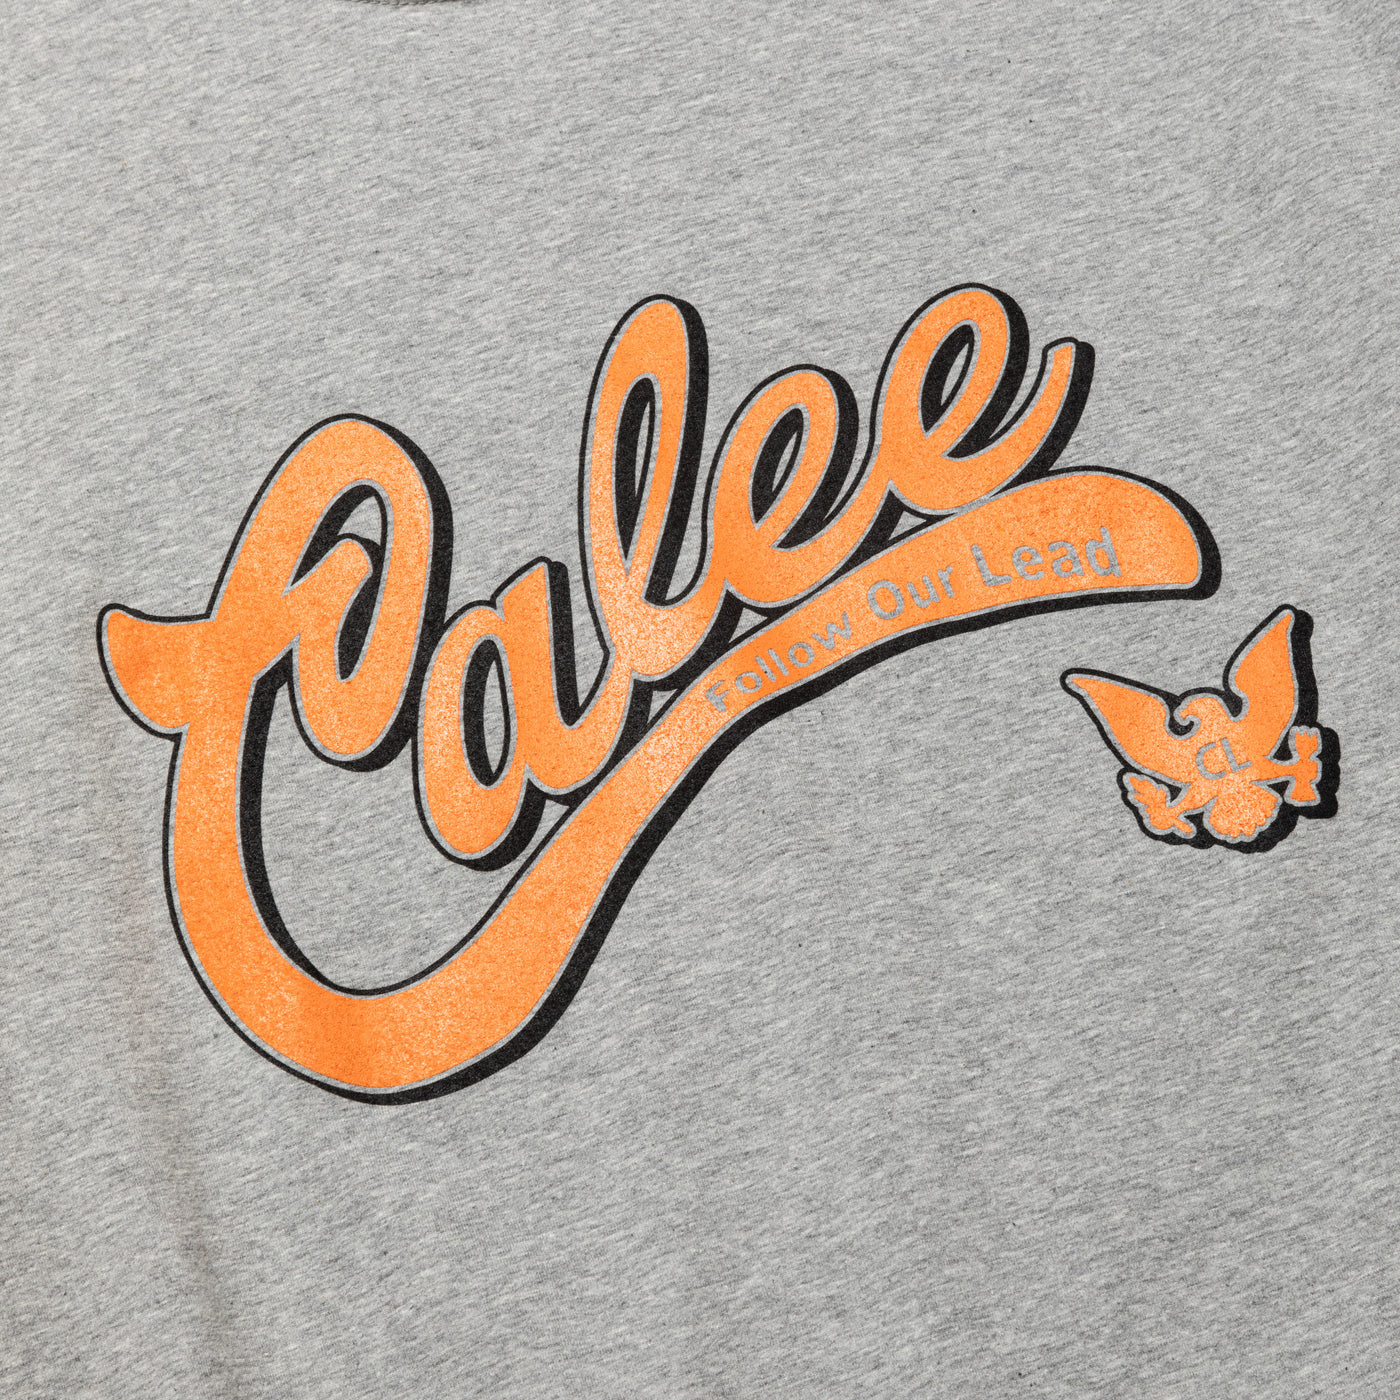 STRETCH CALEE COLLAGE LOGO TEE